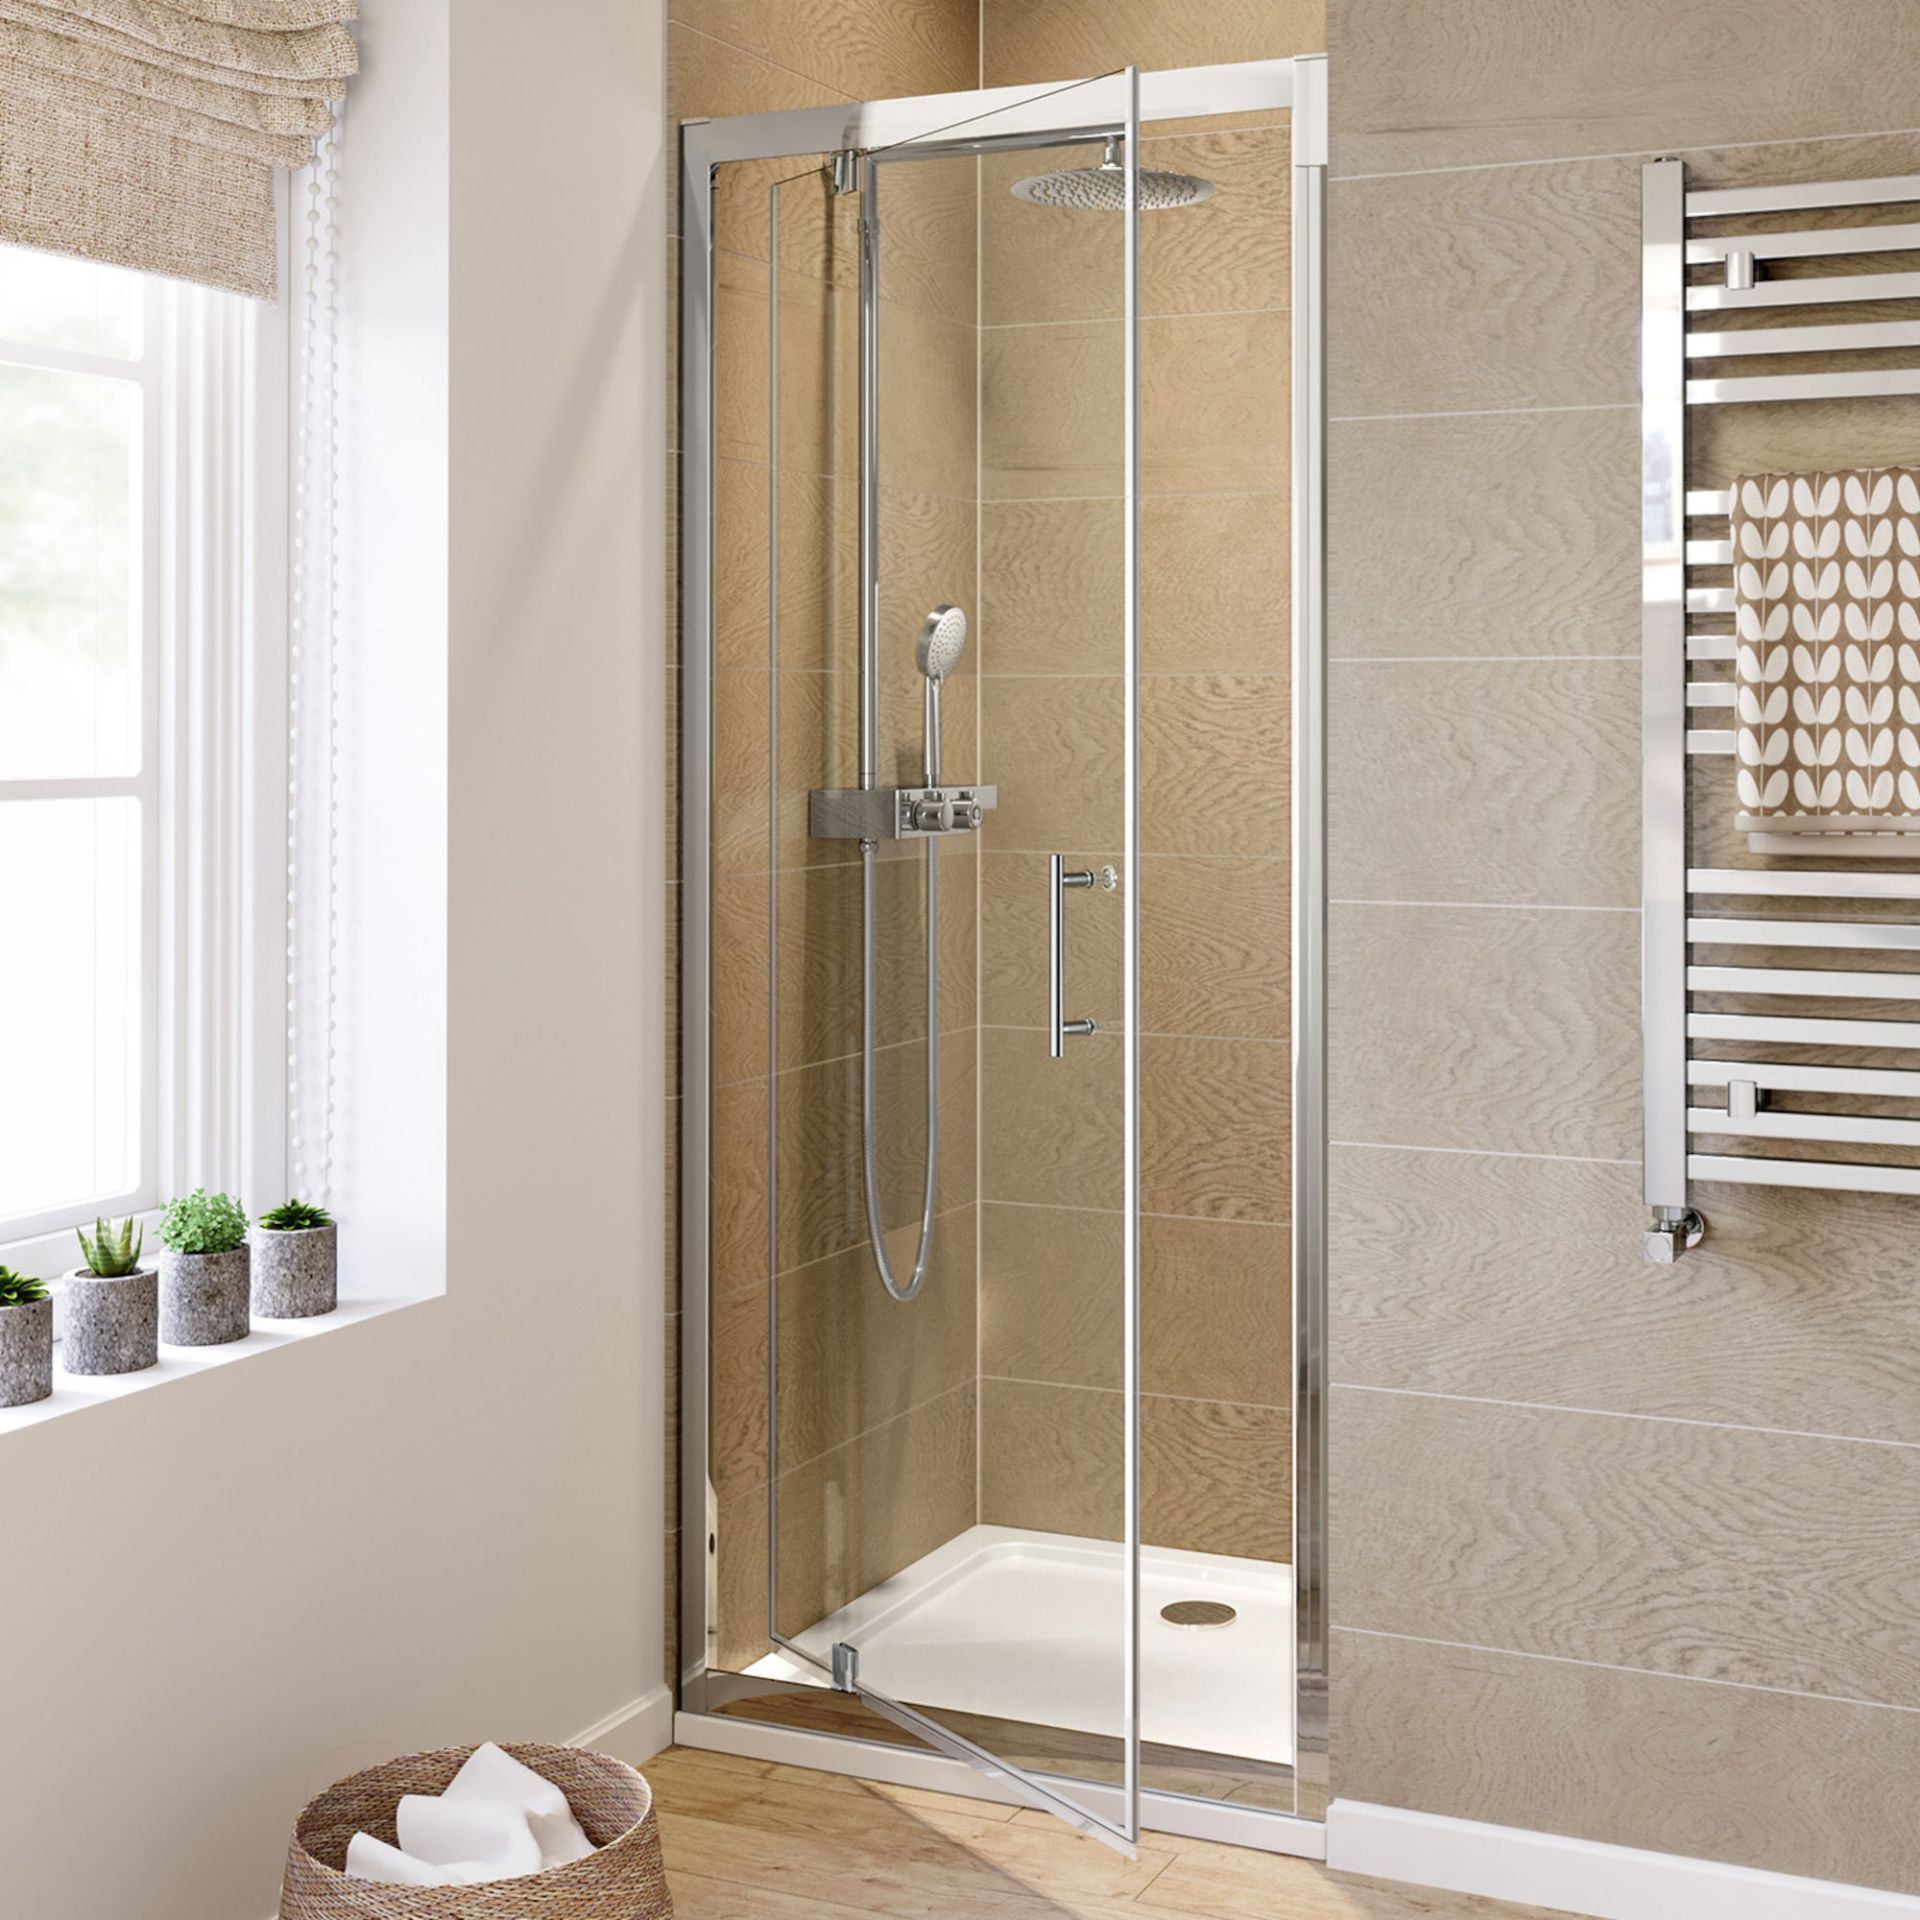 New 700mm - 6mm - Premium Pivot Shower Door. RRP £299.99.8mm Safety Glass Fully Waterproof Tested.